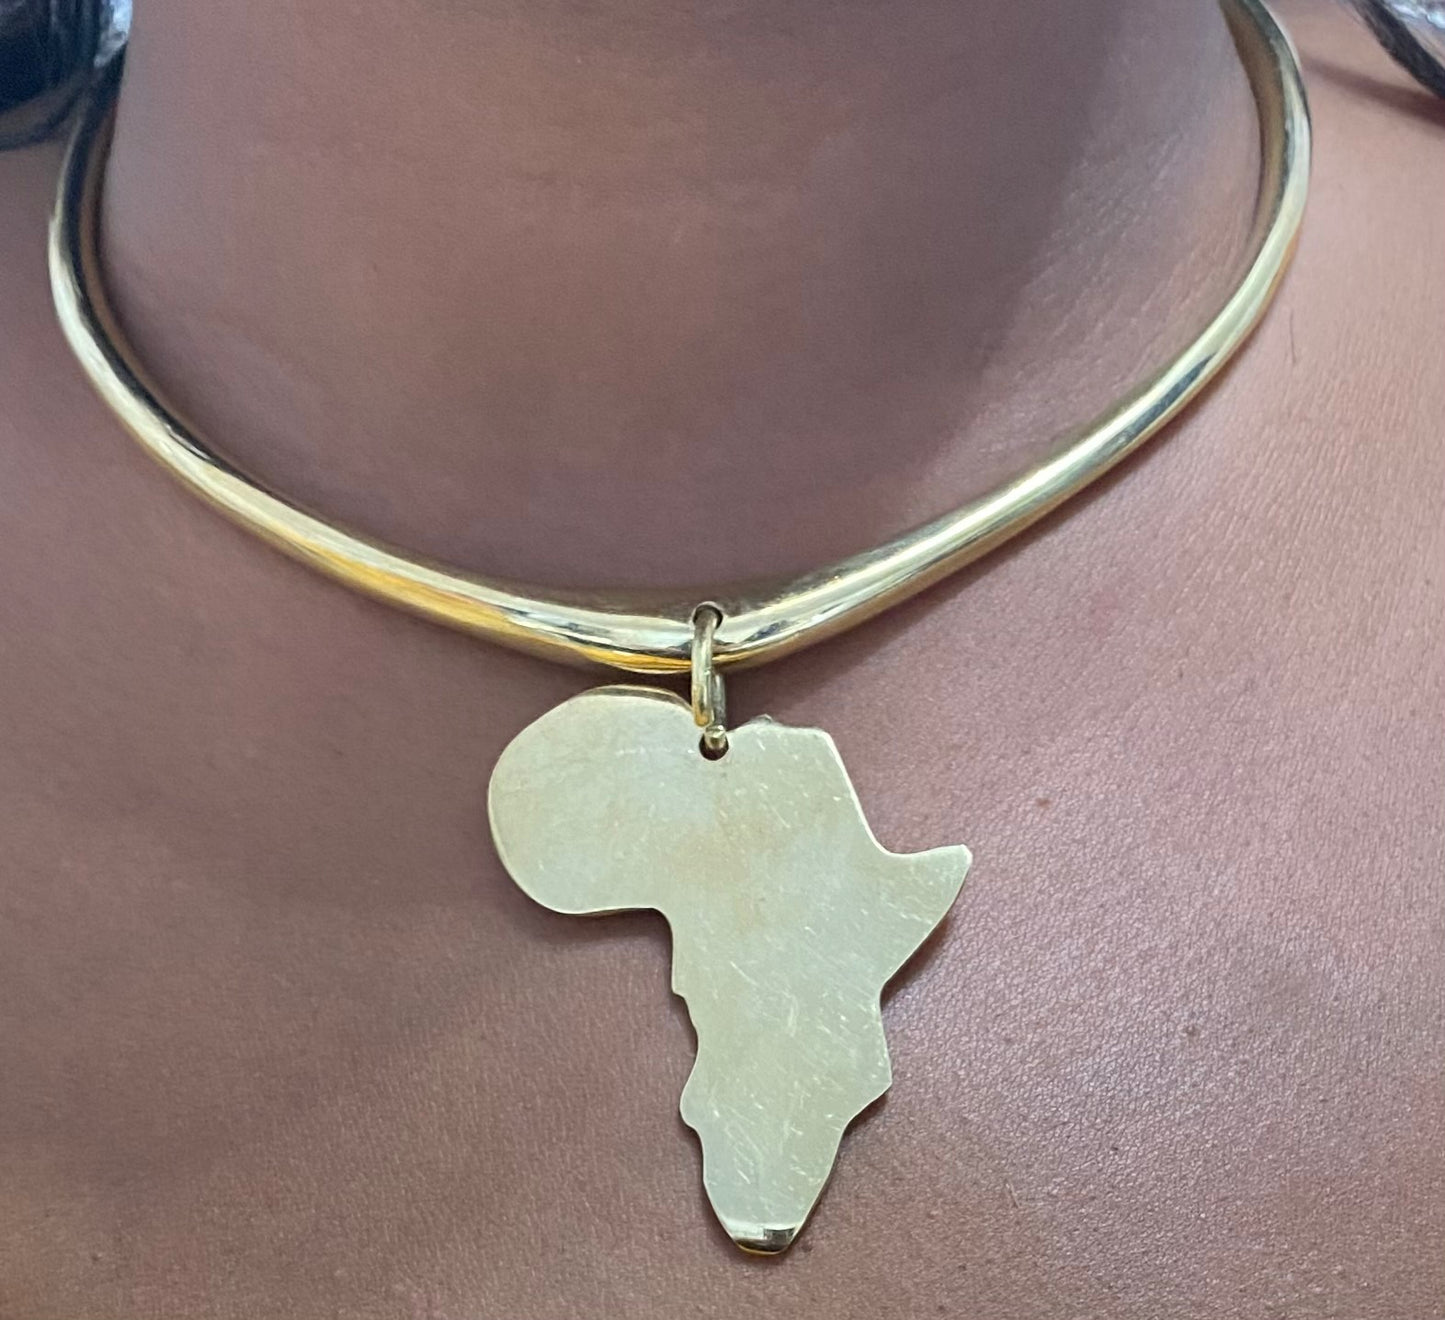 African Brass Pendant Necklace